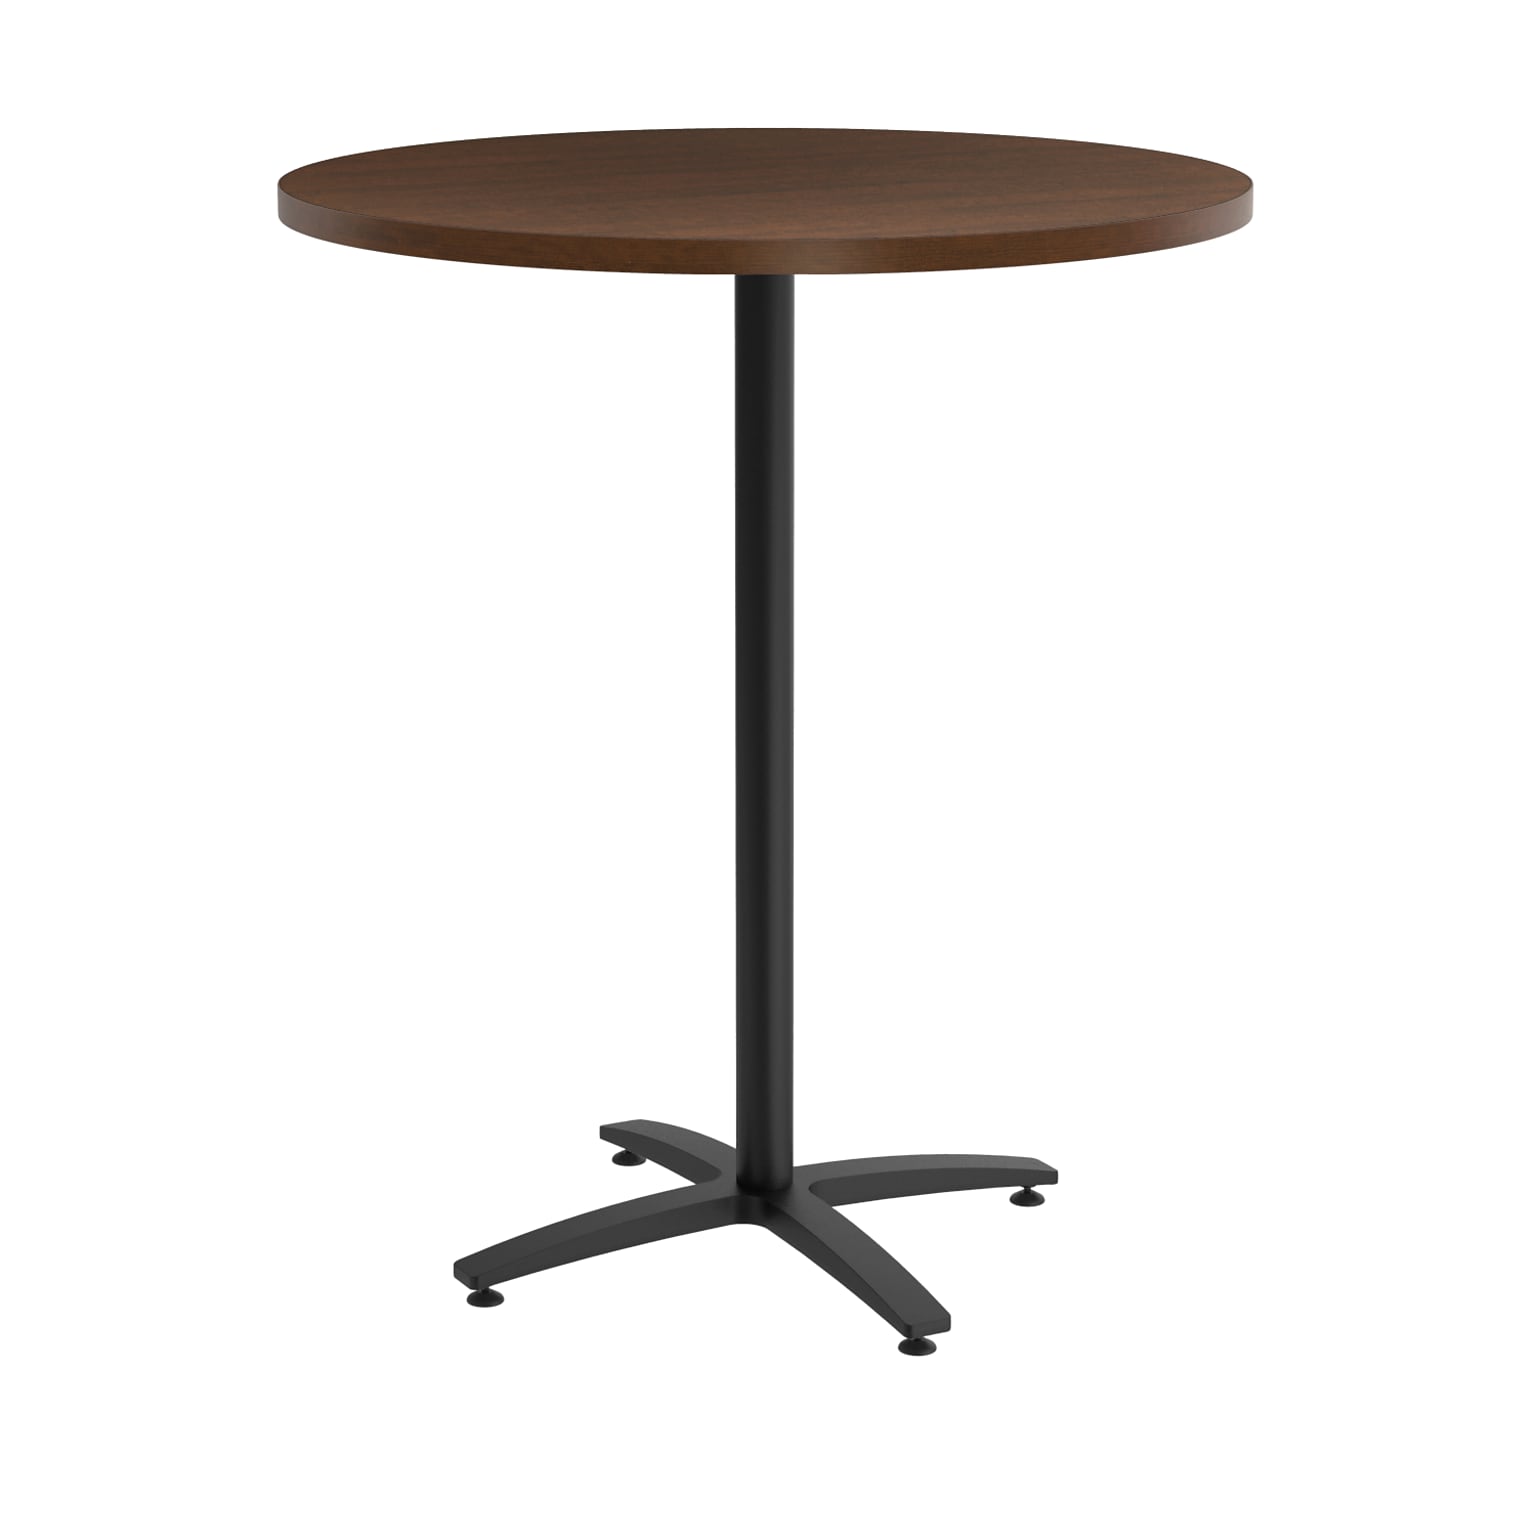 Union & Scale Workplace2.0™ Multipurpose 36 Round Shaker Cherry Laminate Bistro Height Black Base Table (54802)